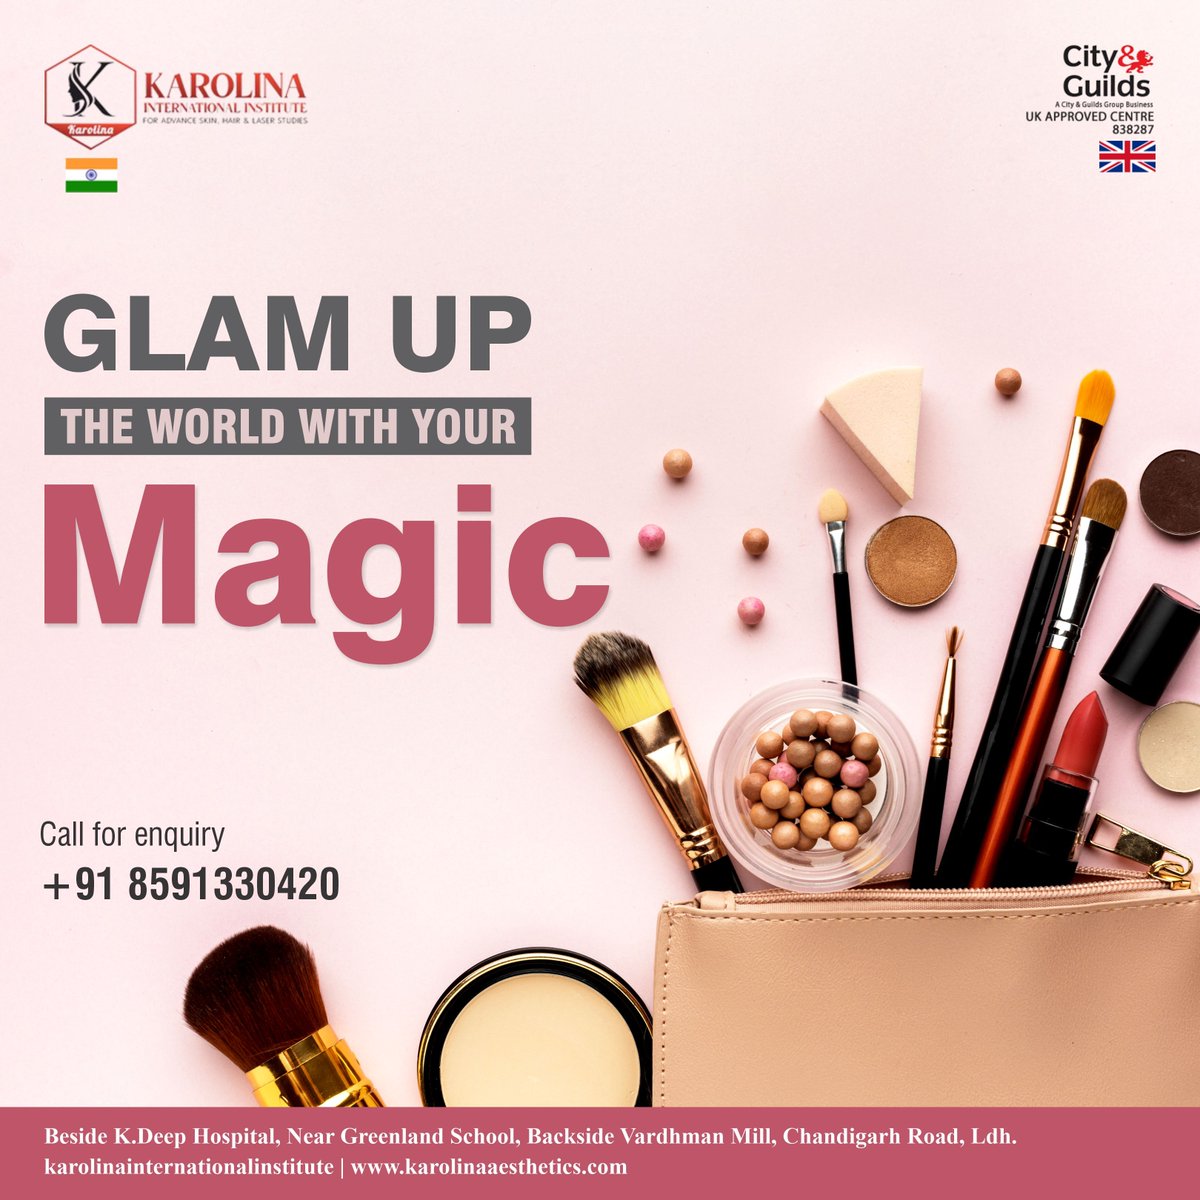 Enter the glamorous world. Choose from a variety of distinctive programmes to develop the skills necessary to land a job as a sought-after makeup artist...

#karolina #beautycourses #beautytraining #beauty #skincare #beautyacademy #beautyproducts #beautyproductsonline